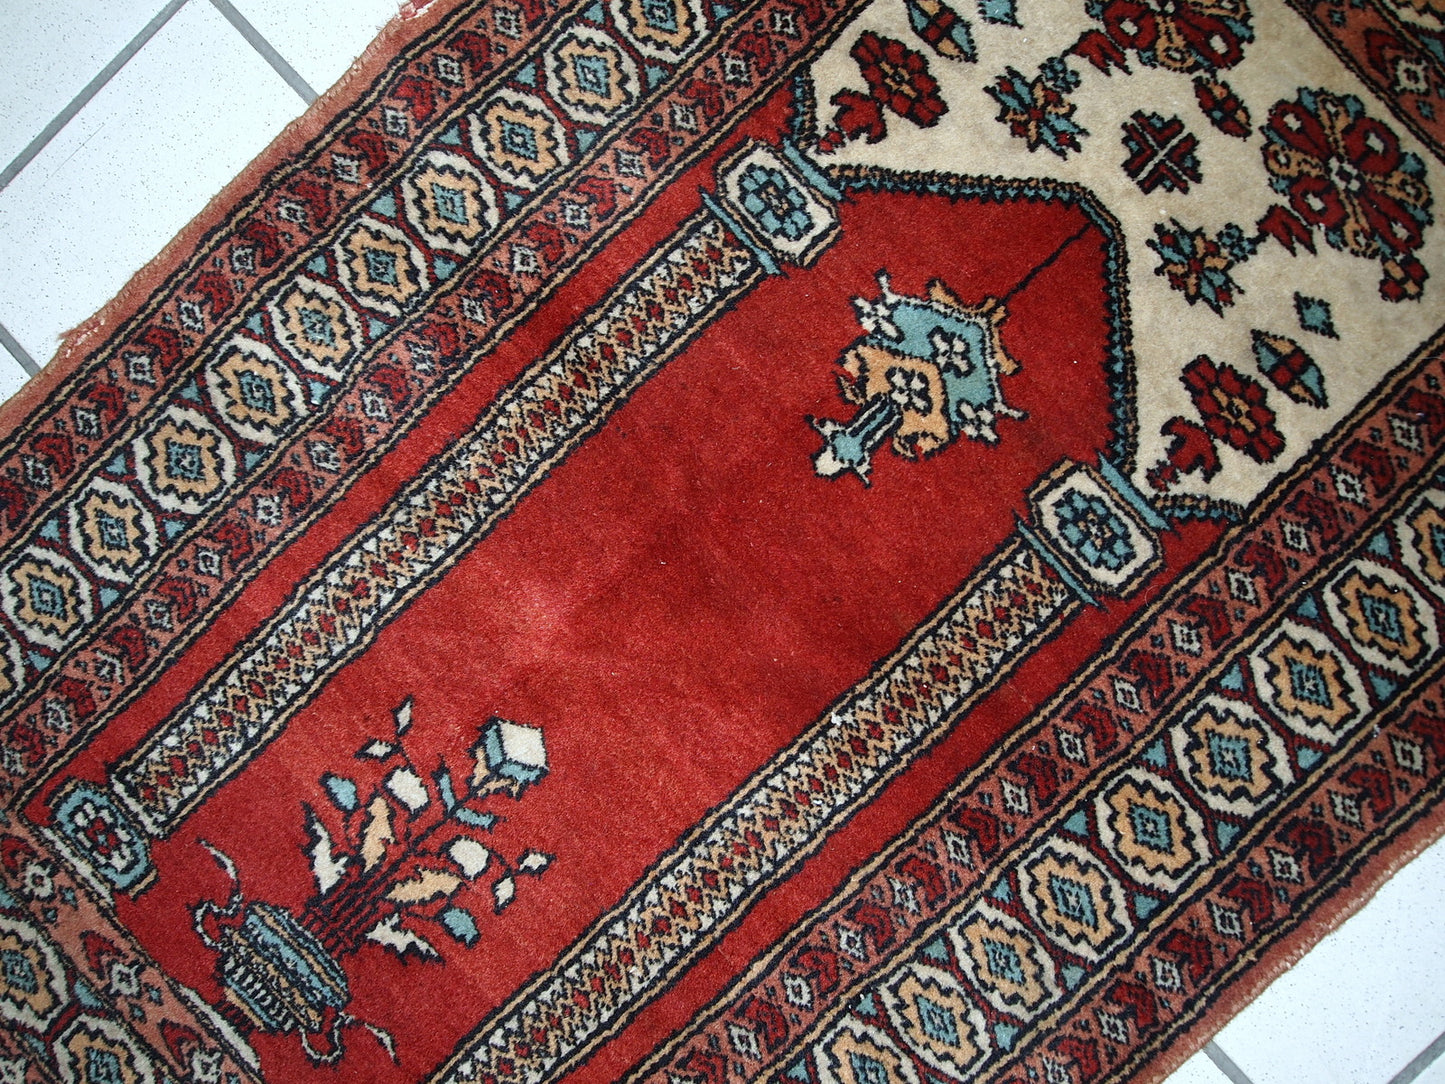 Handmade vintage prayer Pakistani Lahore rug in original good condition. The rug is in bright shade of red and beautiful decorative border.